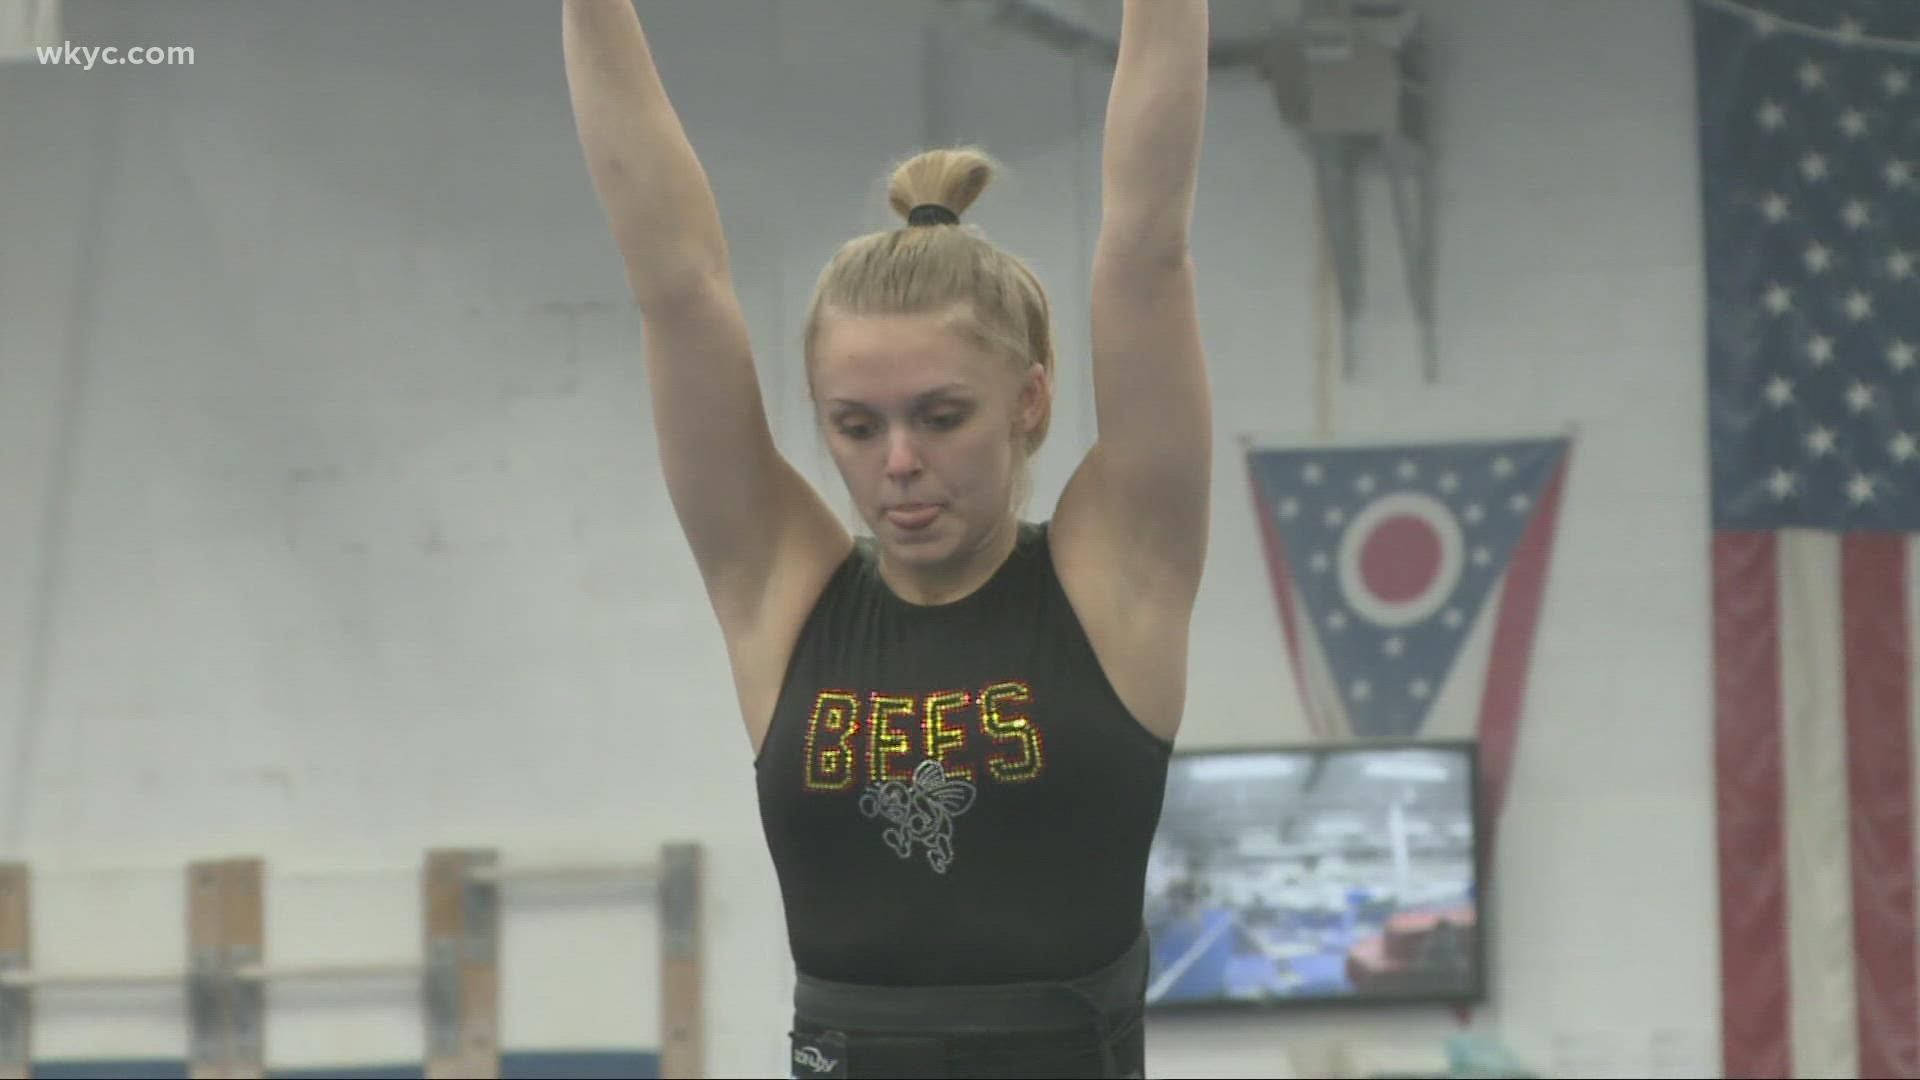 The Brecksville-Broadview Heights gymnastics team is in rare air right now.